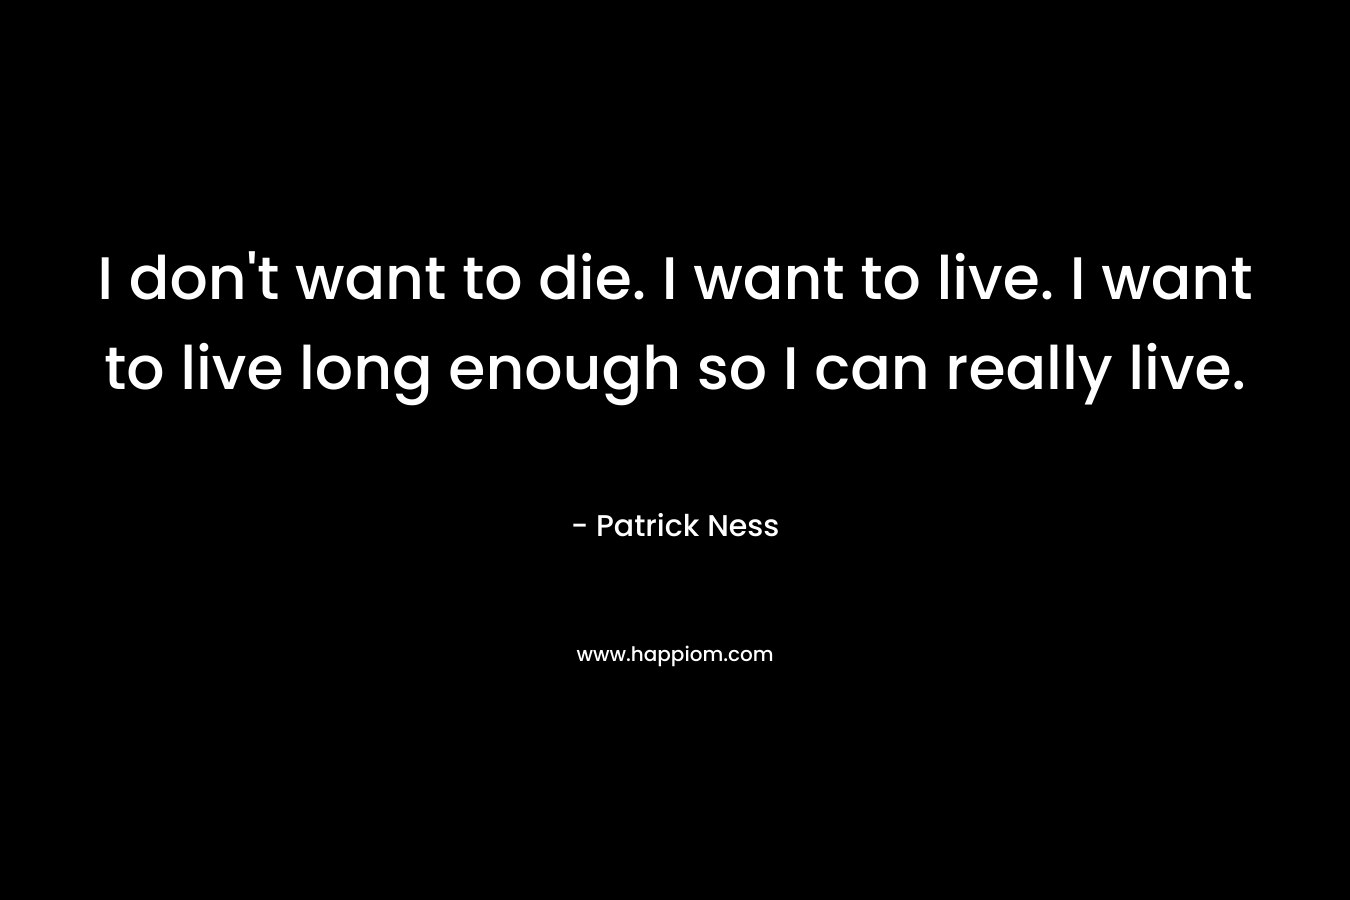 I don't want to die. I want to live. I want to live long enough so I can really live.